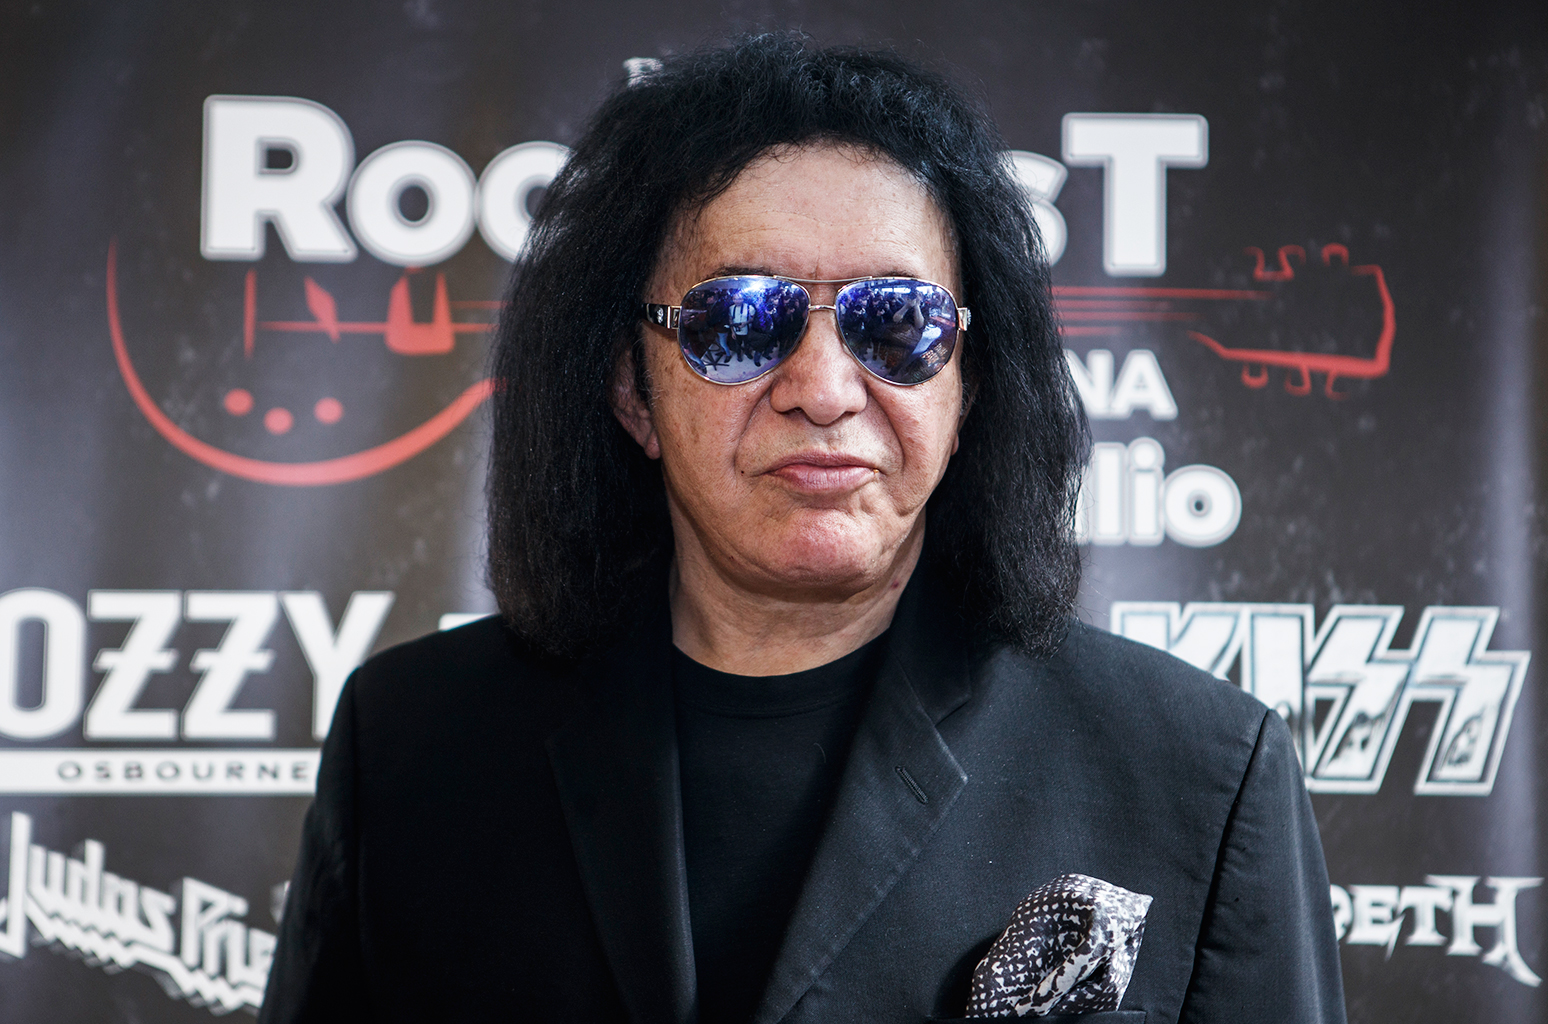 Gene Simmons Puts Ice in His Cereal, Launches Heated Twitter Debate - www.billboard.com